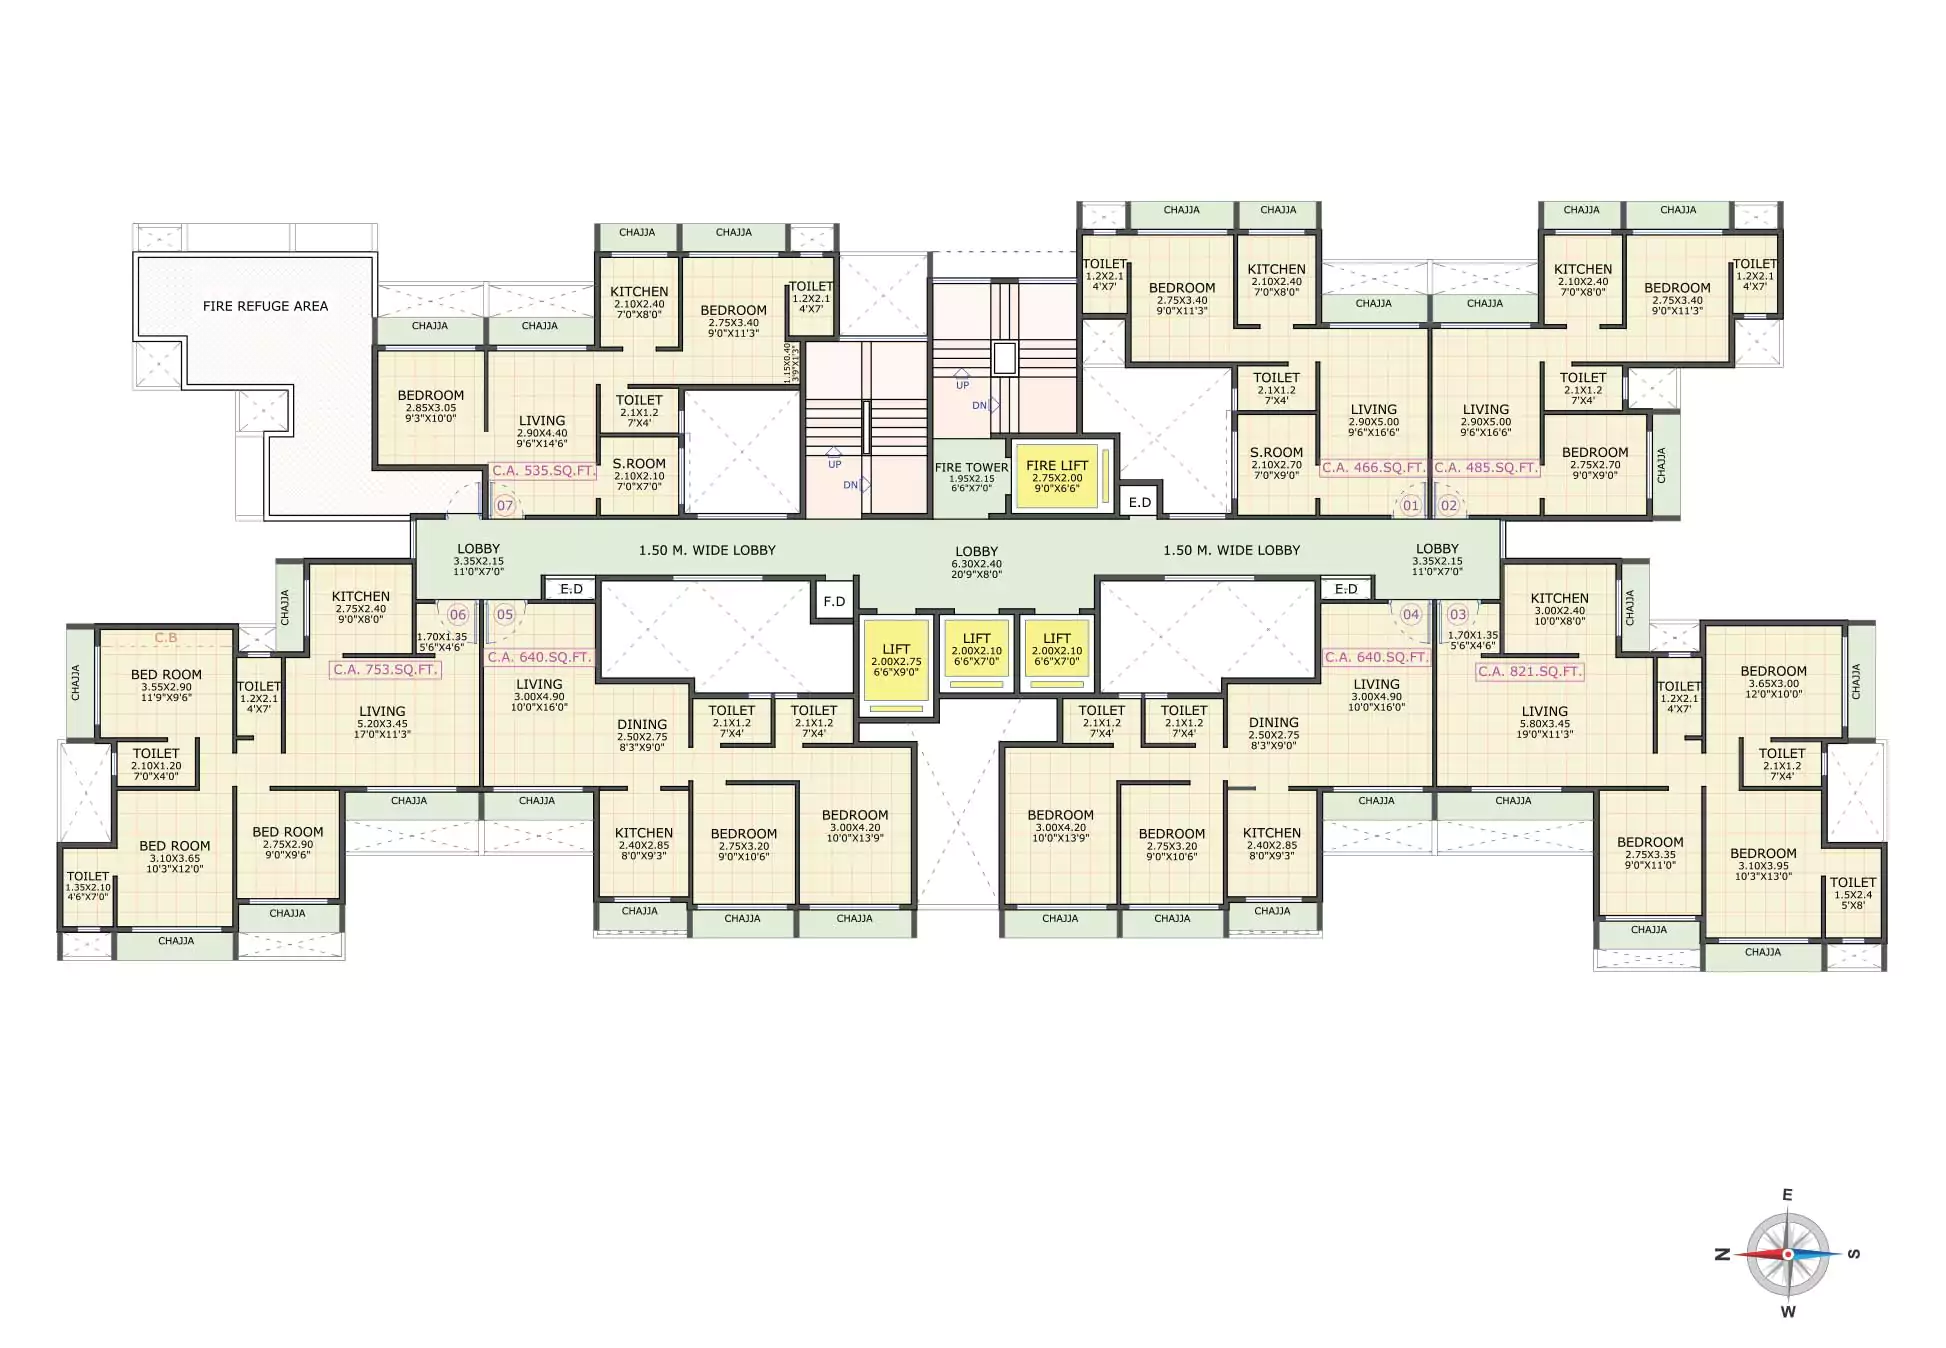 Typical Floor Plan (7th, 12th & 17th) - Gami Jade